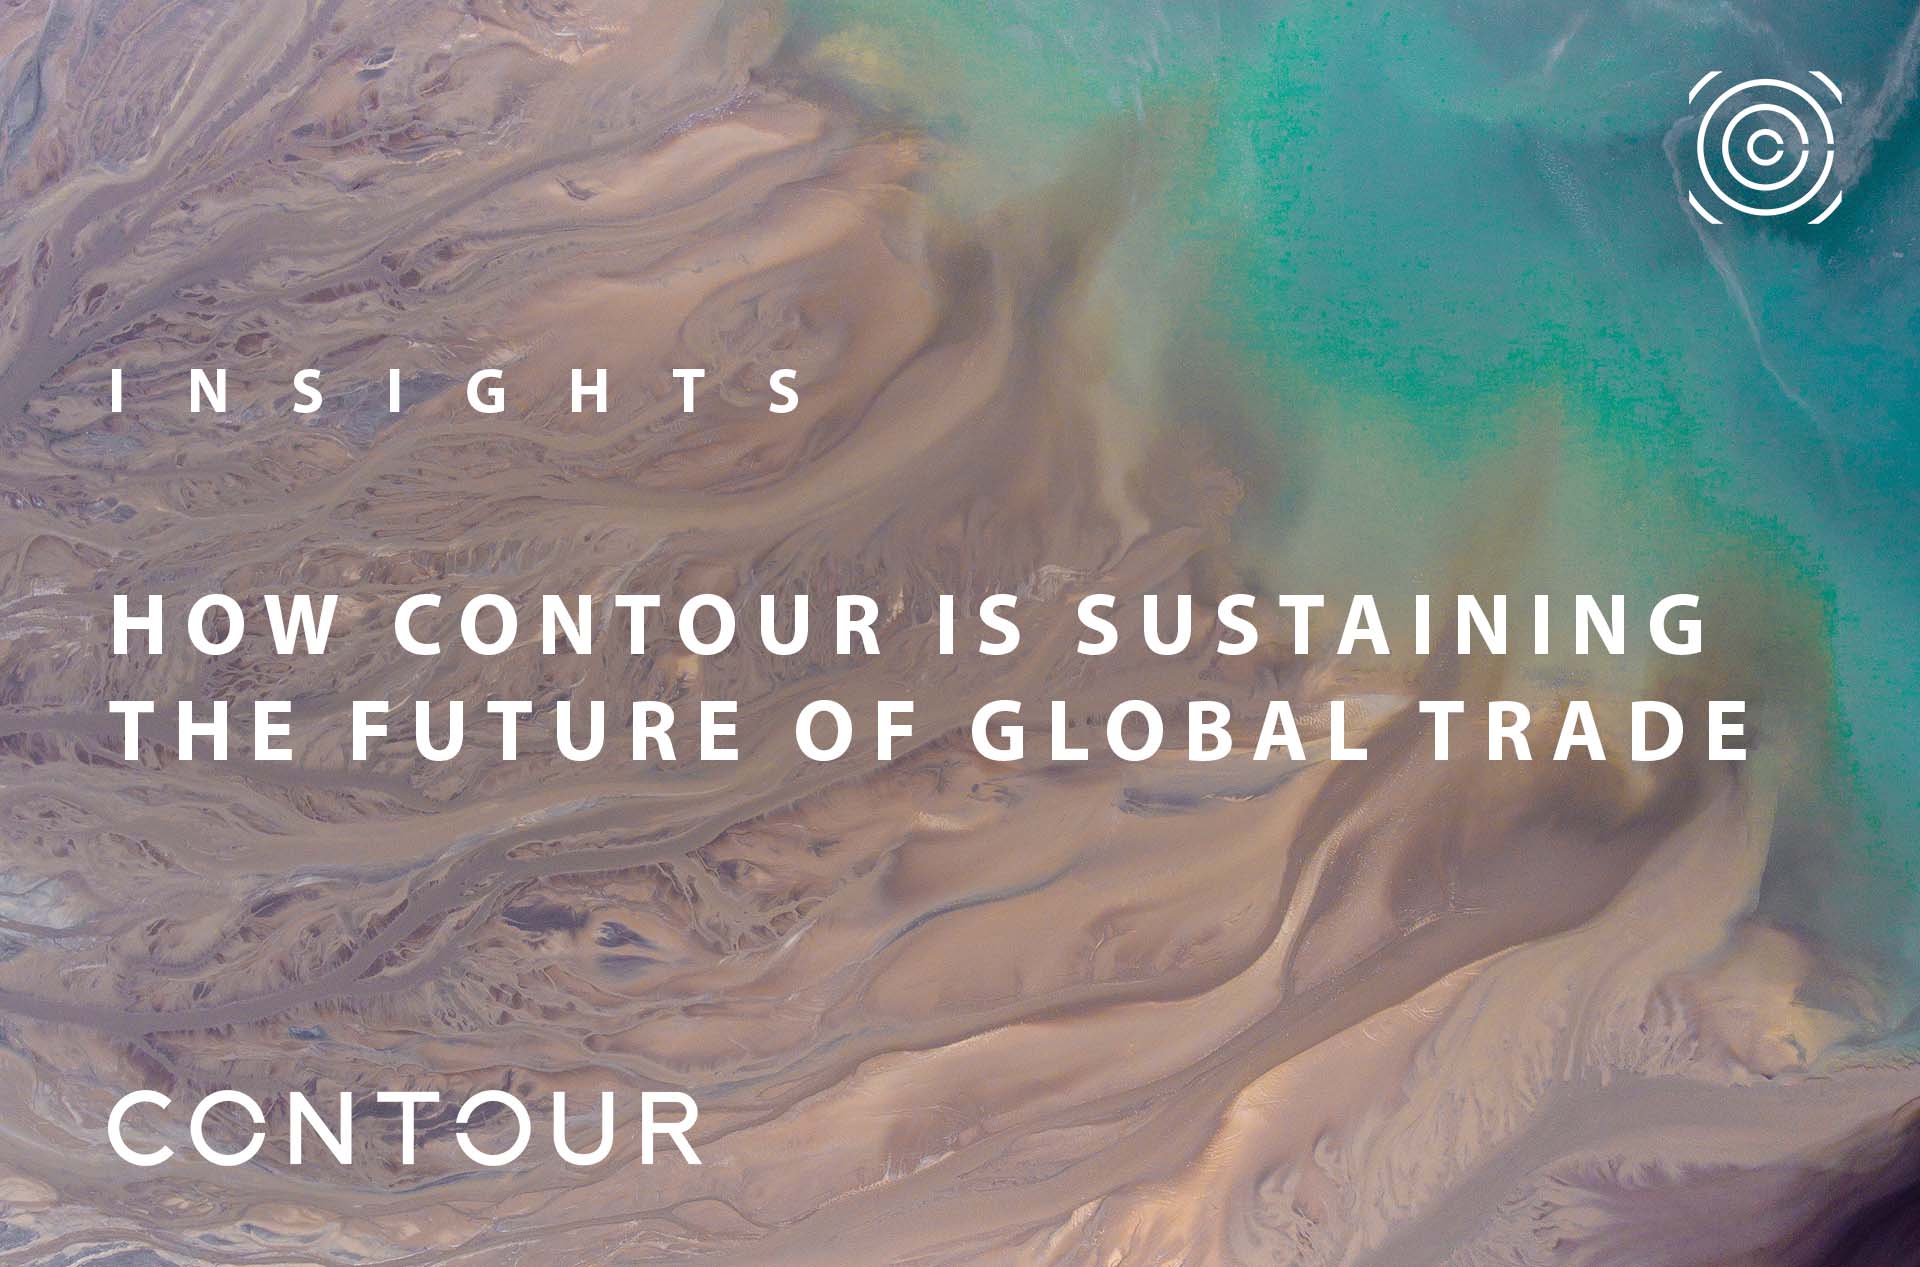 How Contour is sustaining the future of global trade